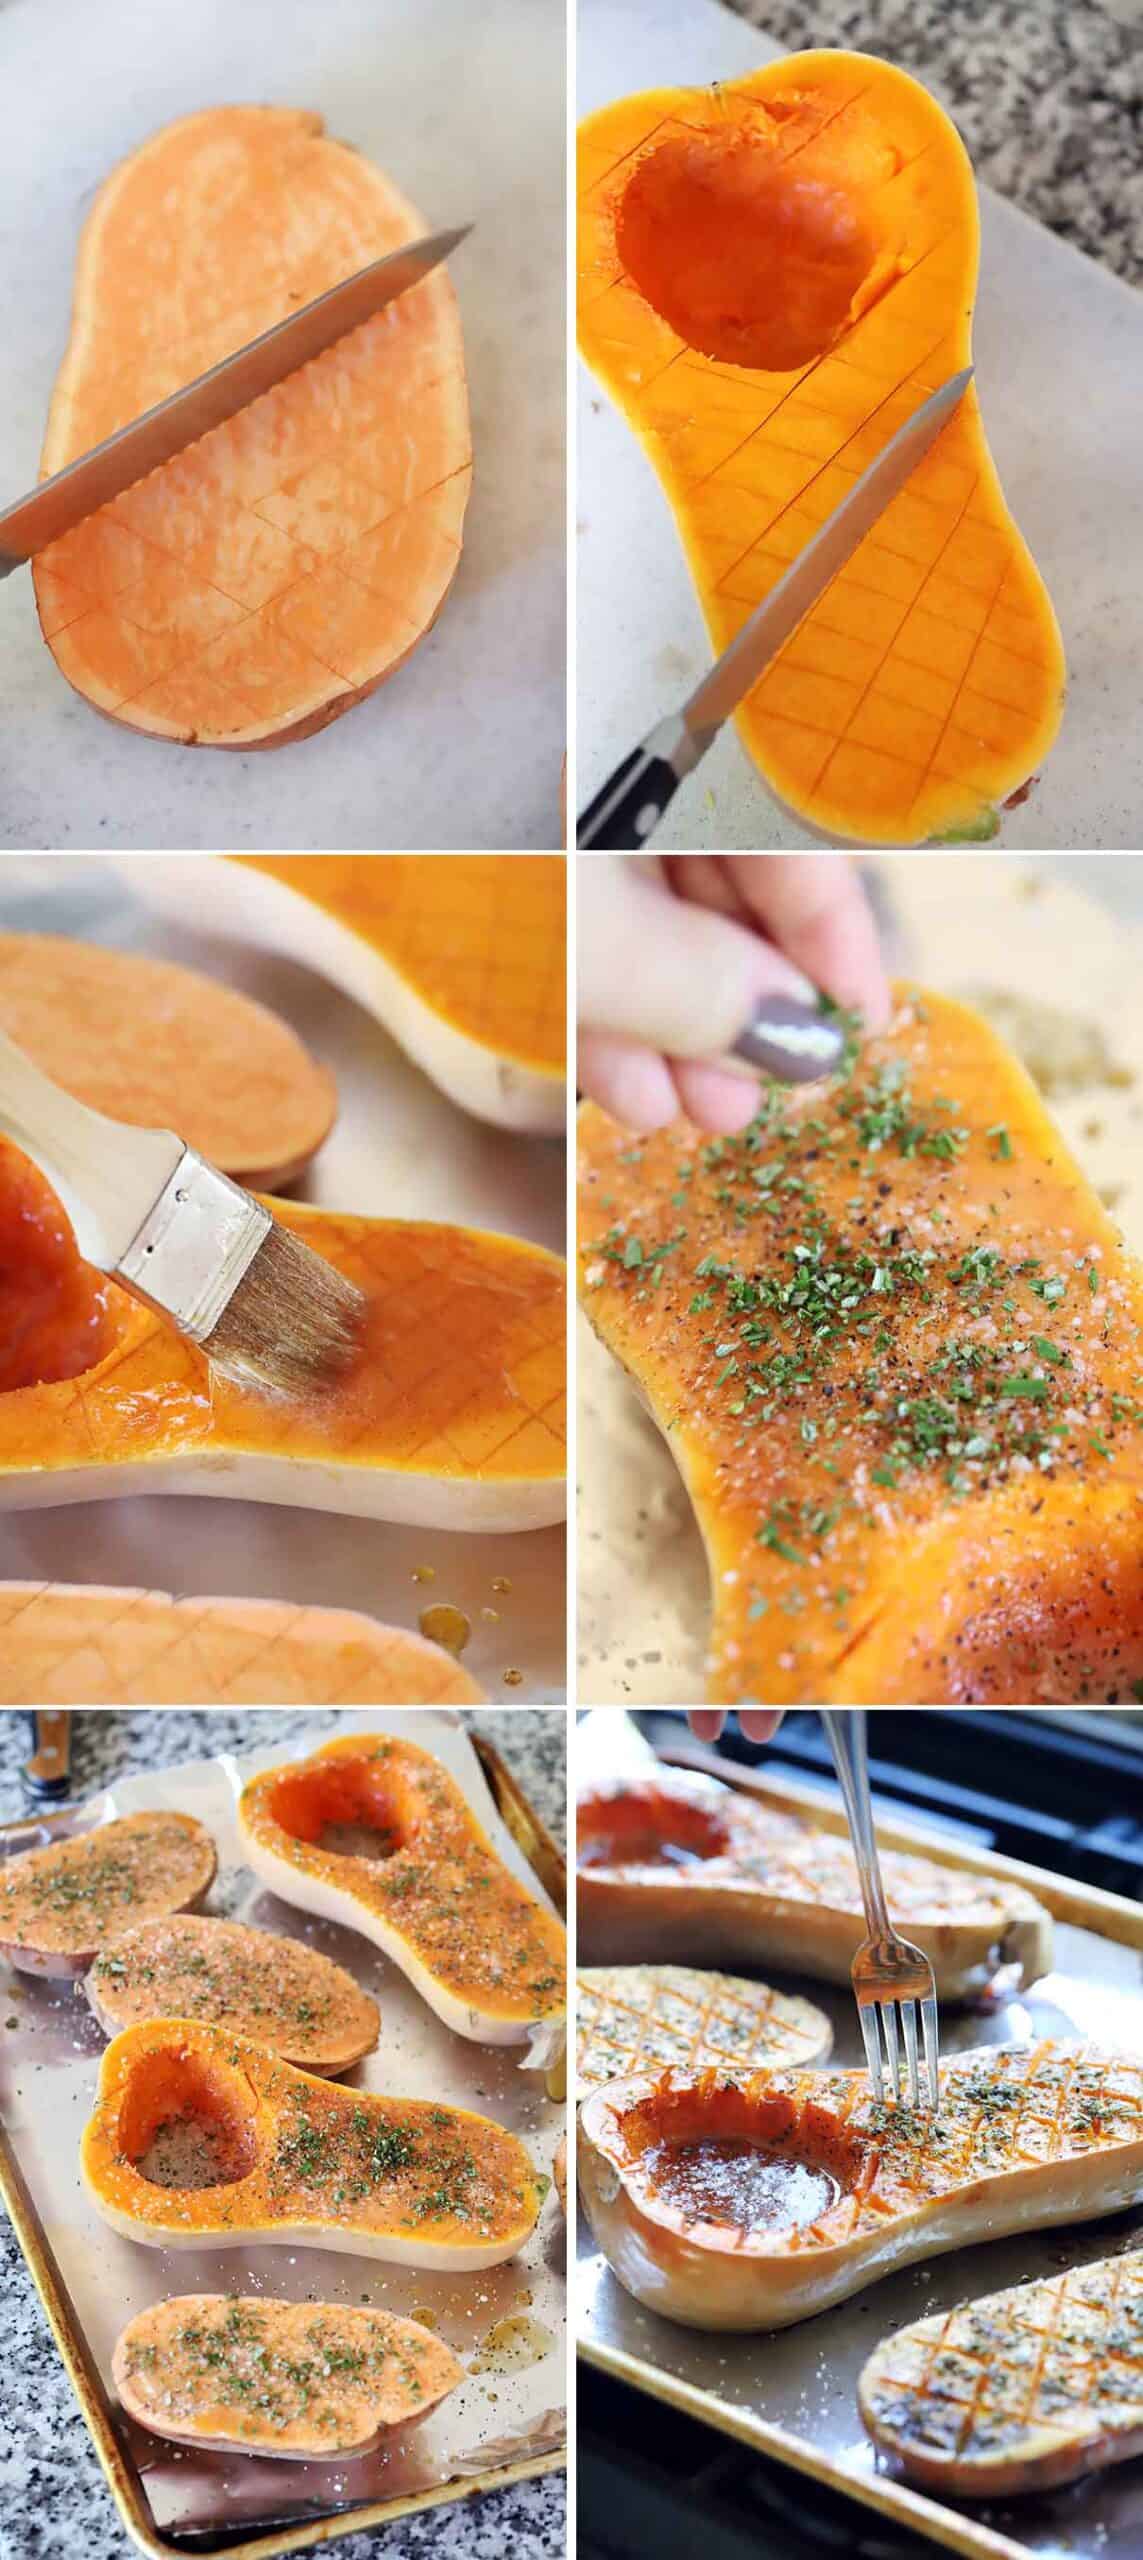 Process collage showing scoring, seasoning, and roasting halved sweet potatoes and butternut squash.